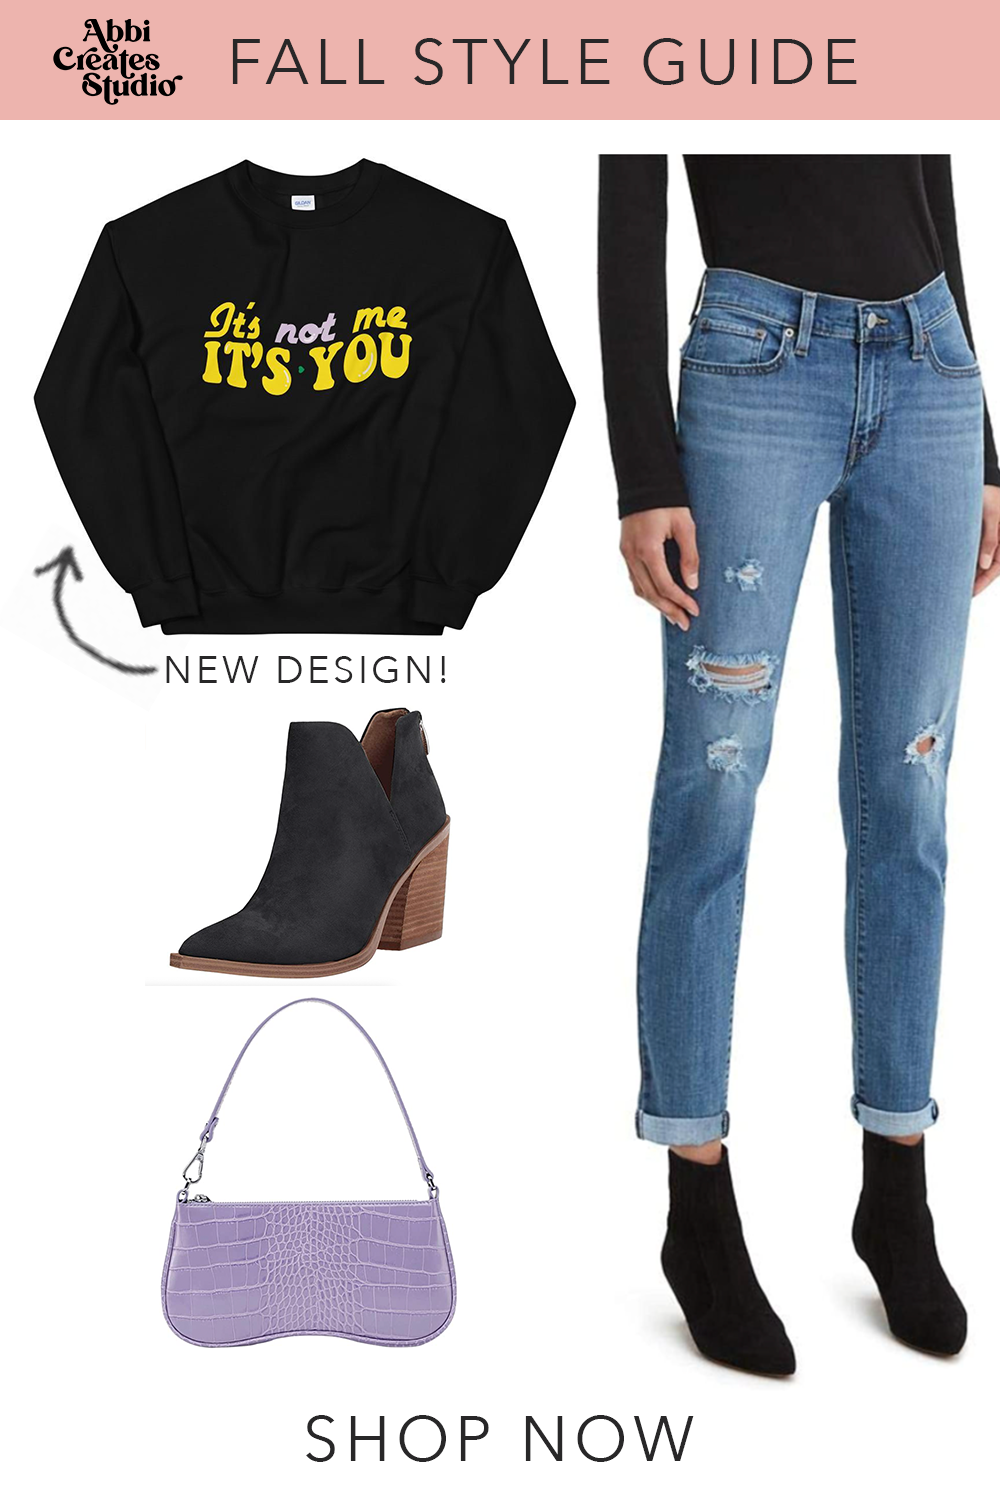 Fall trendy sweater | crewneck outfit inspo, fall outfit style guide  fall outfit sweater ideas . 